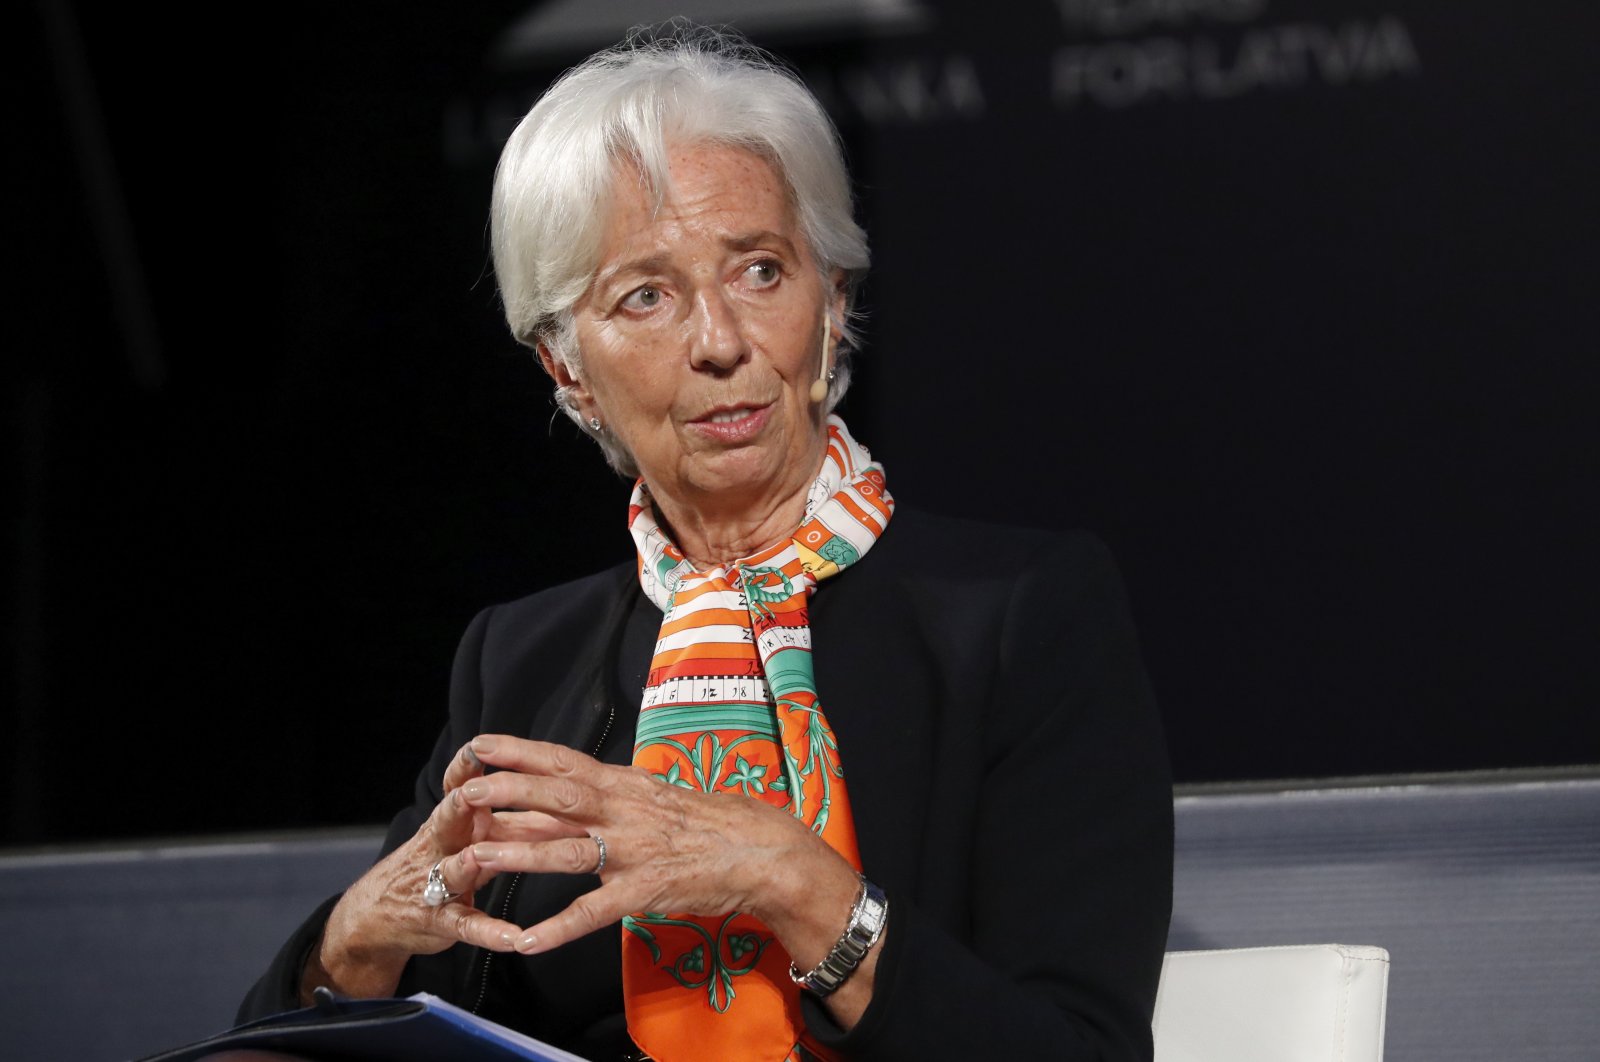 European Central Bank (ECB) President Christine Lagarde speaks during the introductory panel &quot;A Bridge over Troubled Waters&quot; at the international economic conference &quot;Sustainability and Money: Shaping the Economy of the Future&quot; in Riga, Latvia, Nov. 3, 2022. (EPA Photo)